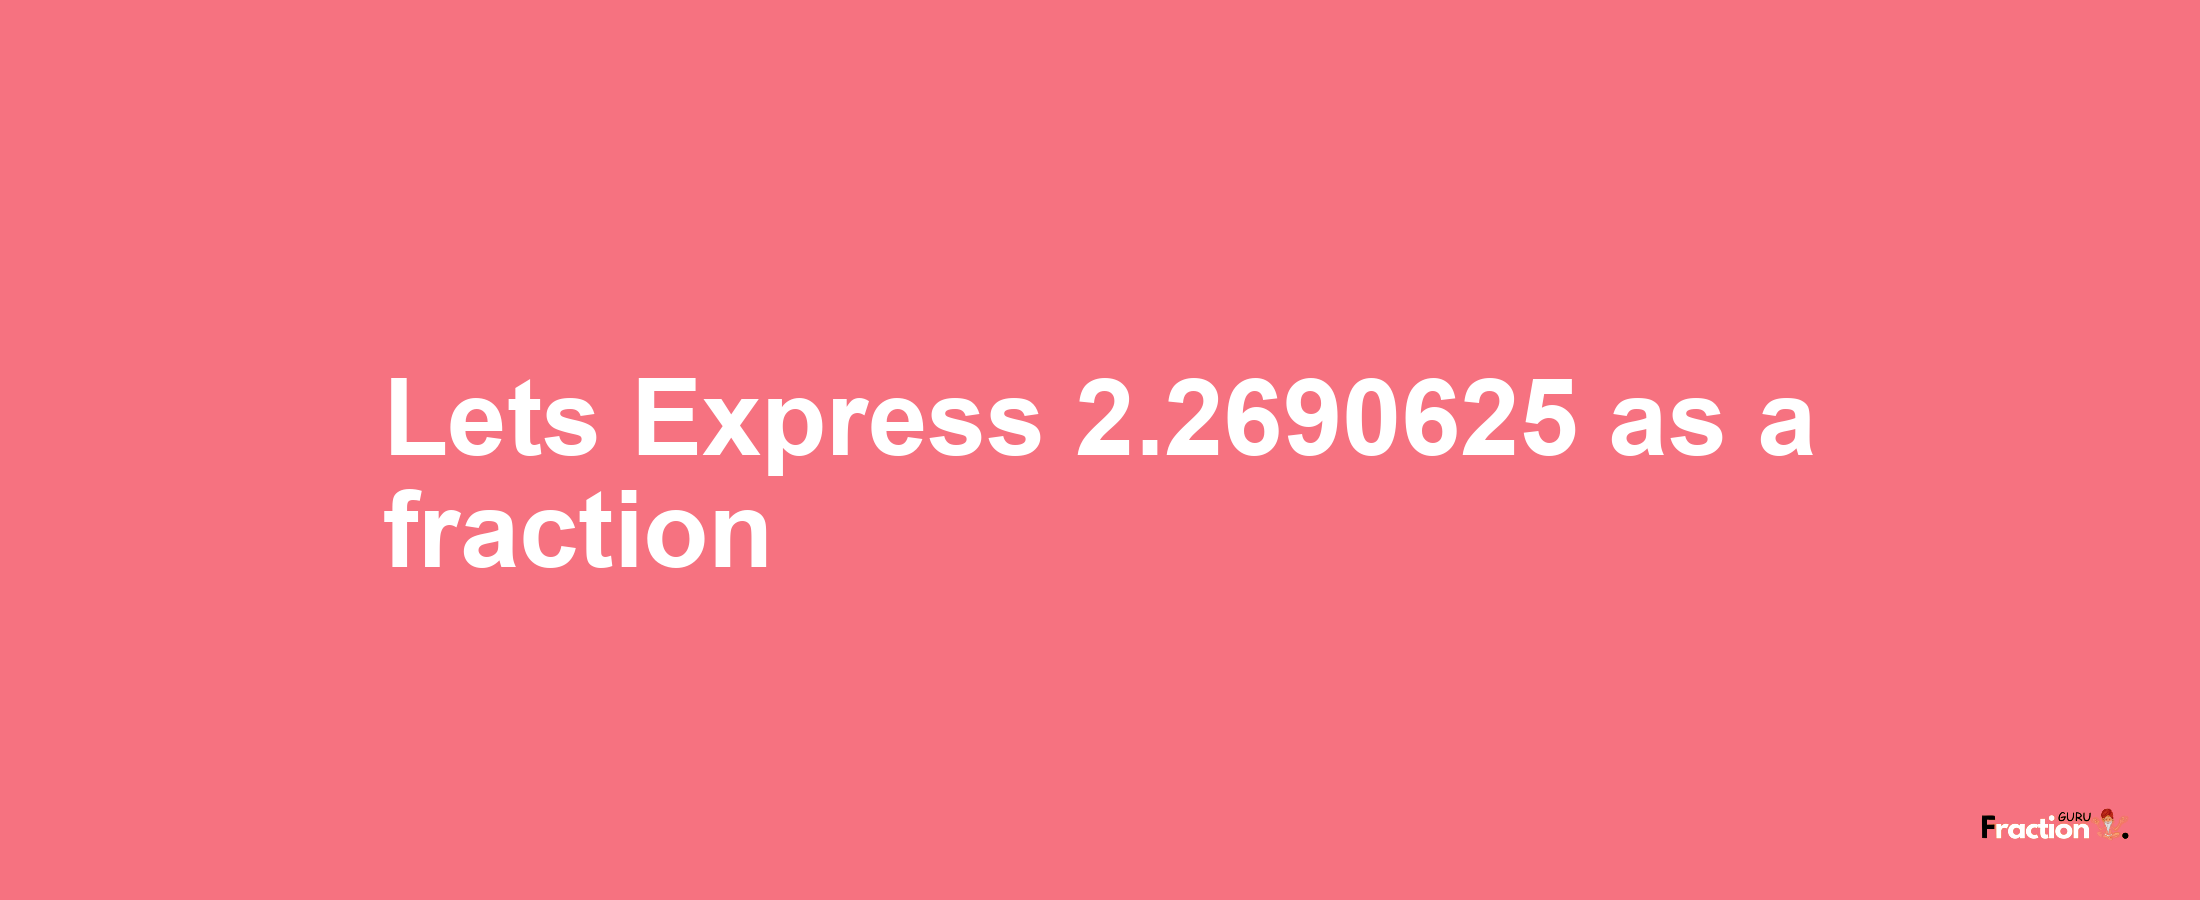 Lets Express 2.2690625 as afraction